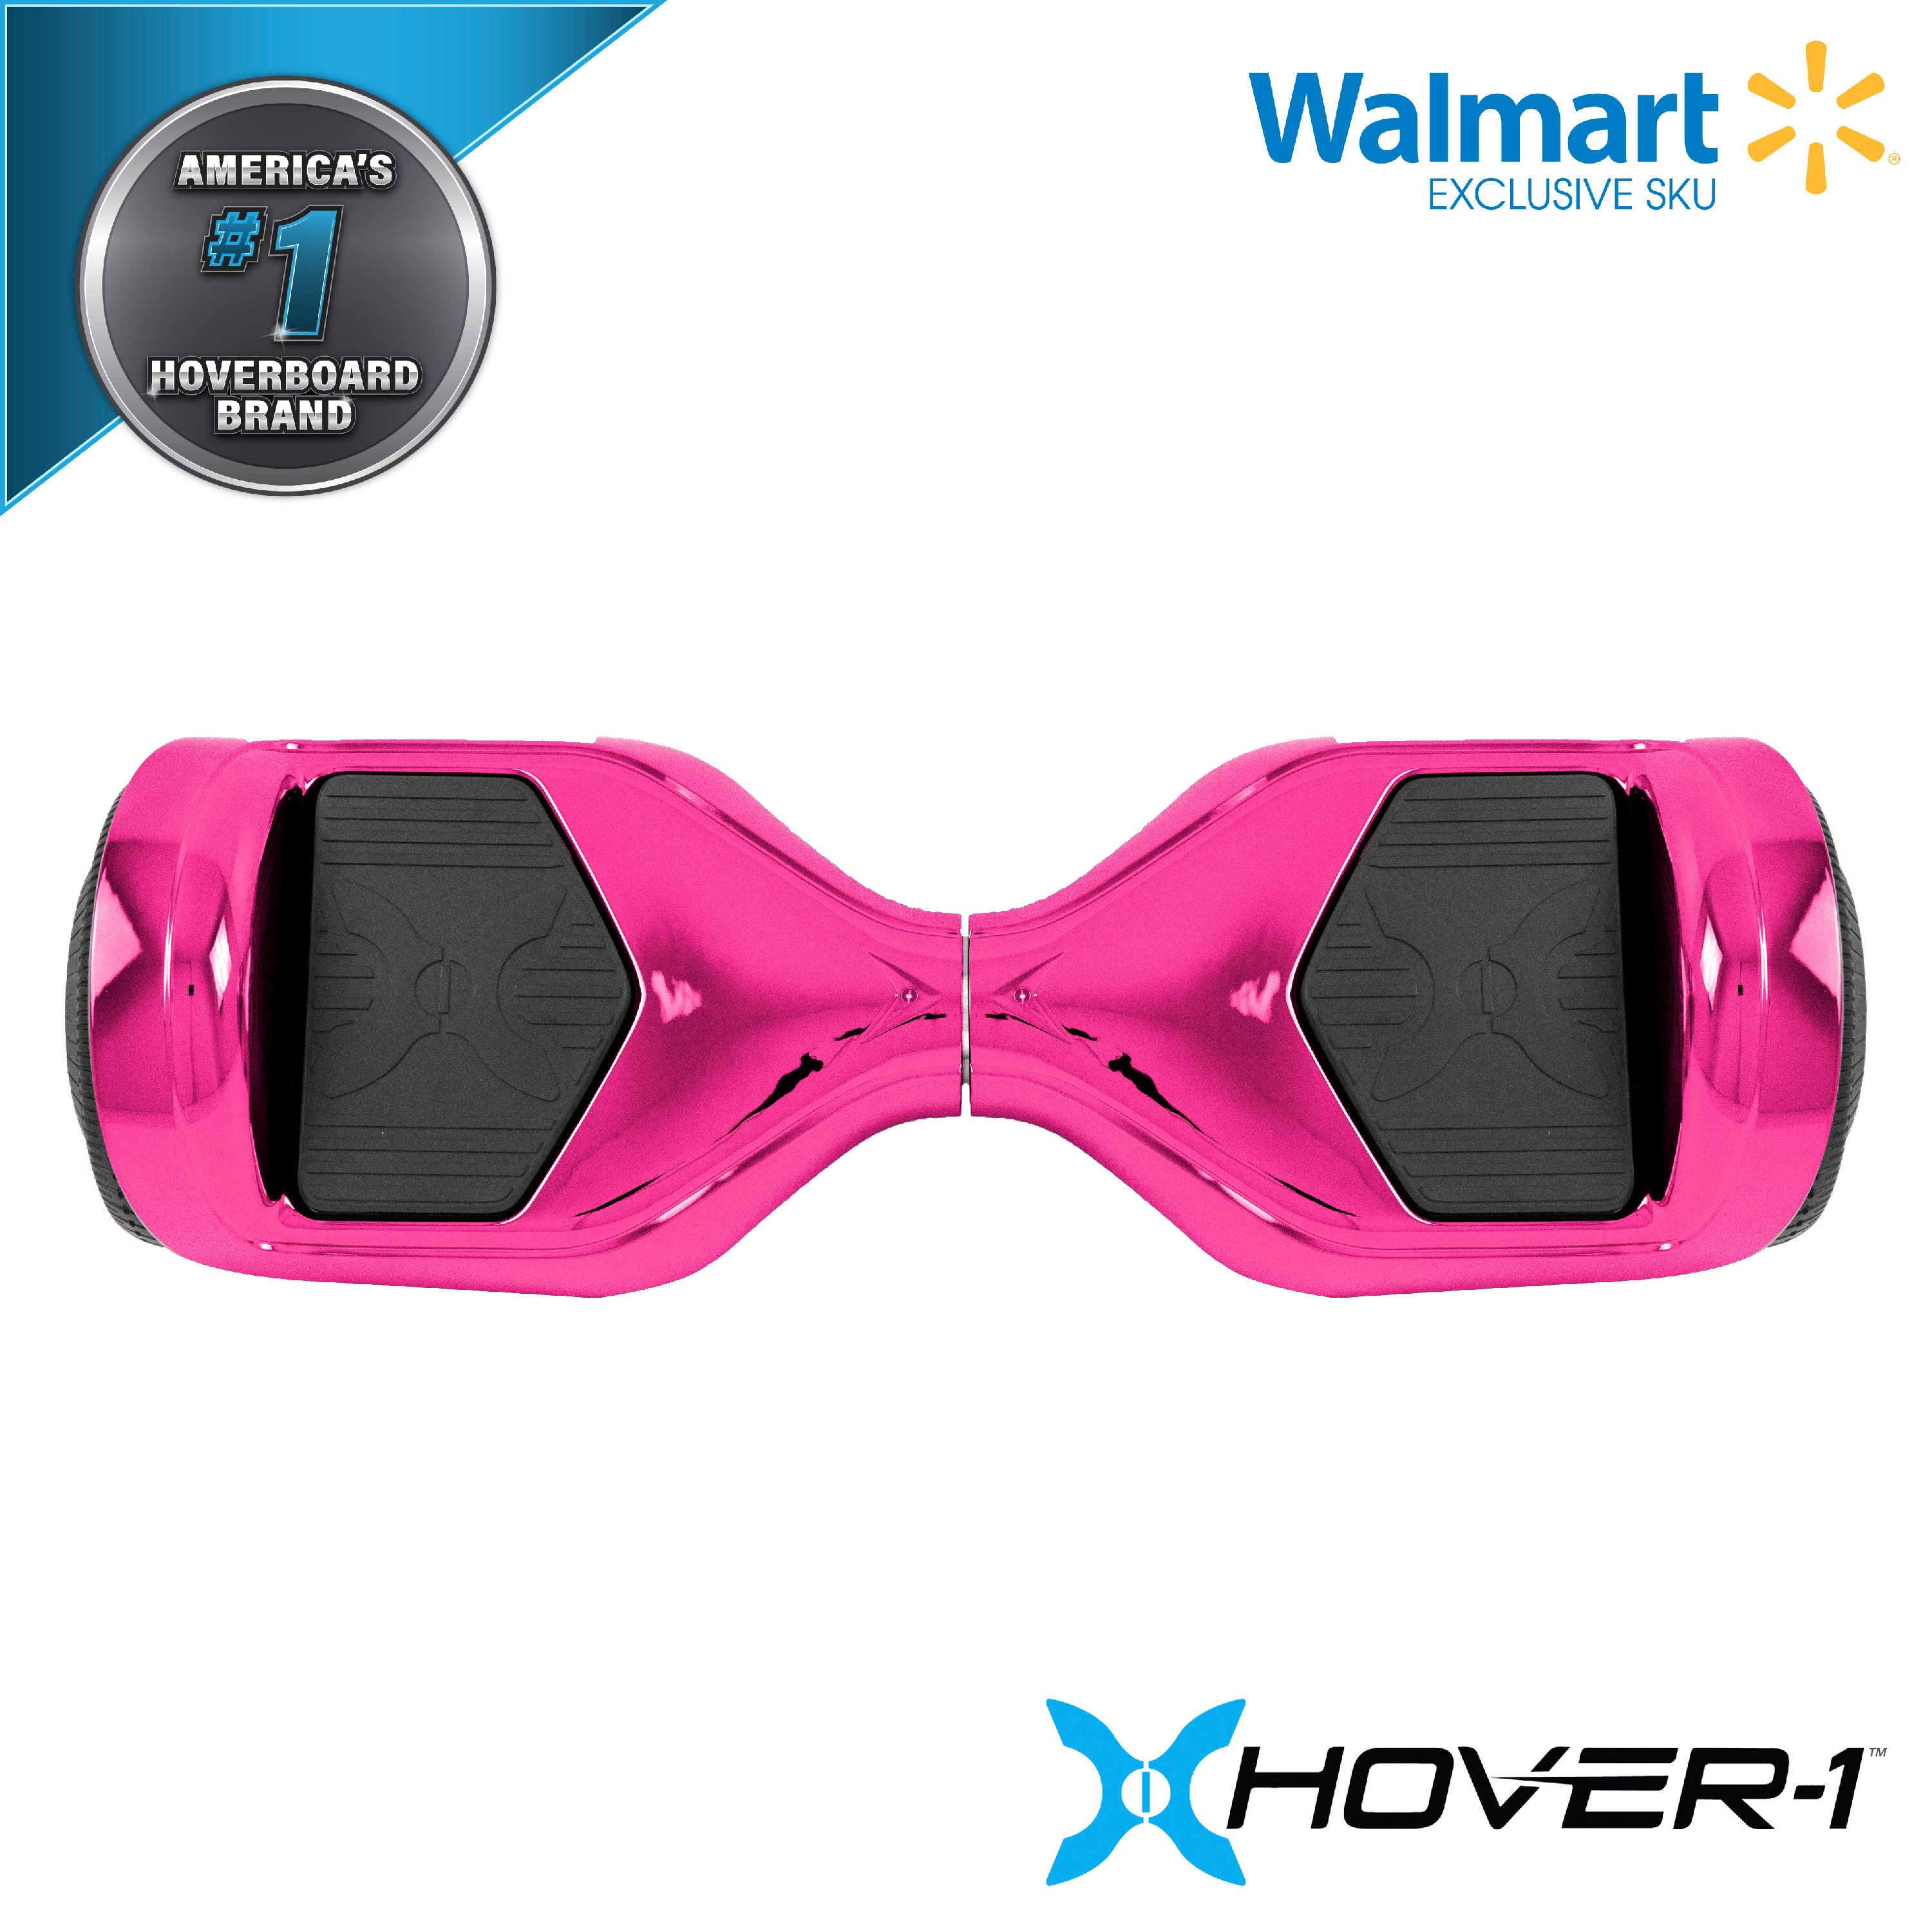 Hover-1 Allstar UL Certified Electric Hoverboard w/ 6.5" Wheels and LED Lights - Pink - image 3 of 6